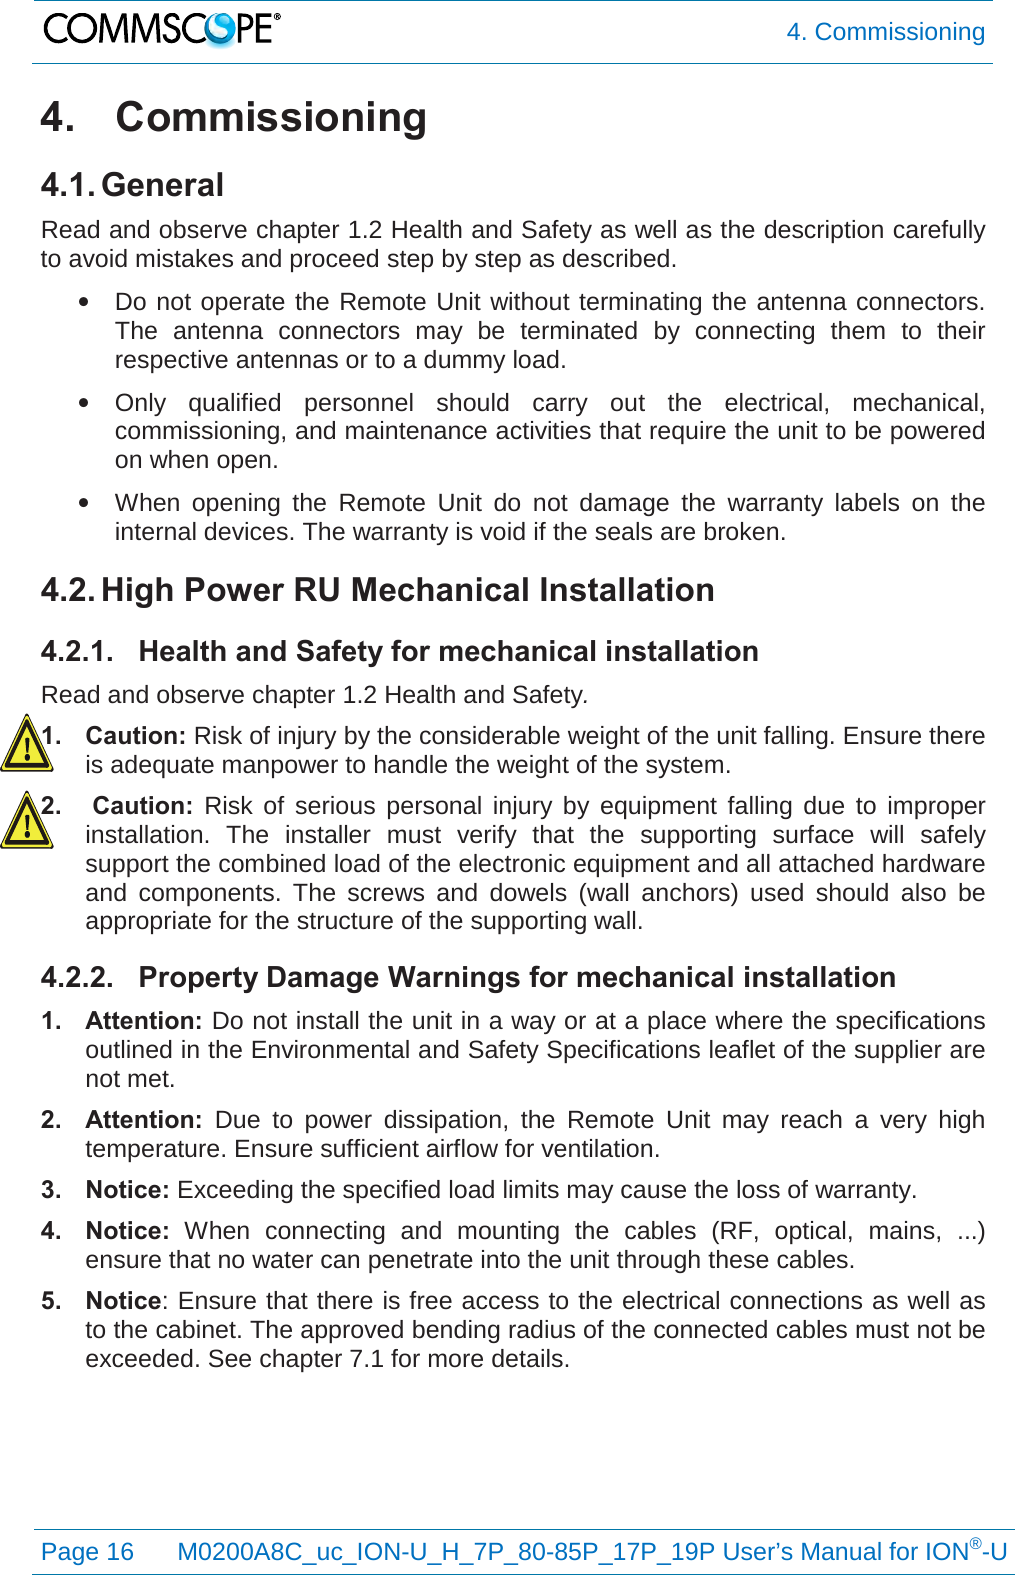  4. Commissioning  Page 16 M0200A8C_uc_ION-U_H_7P_80-85P_17P_19P User’s Manual for ION®-U  4. Commissioning 4.1. General Read and observe chapter 1.2 Health and Safety as well as the description carefully to avoid mistakes and proceed step by step as described. • Do not operate the Remote Unit without terminating the antenna connectors. The antenna connectors may be terminated by connecting them to their respective antennas or to a dummy load. • Only qualified personnel should carry out the electrical, mechanical, commissioning, and maintenance activities that require the unit to be powered on when open. • When opening the Remote Unit do not damage the warranty labels on the internal devices. The warranty is void if the seals are broken. 4.2. High Power RU Mechanical Installation 4.2.1. Health and Safety for mechanical installation Read and observe chapter 1.2 Health and Safety. 1. Caution: Risk of injury by the considerable weight of the unit falling. Ensure there is adequate manpower to handle the weight of the system. 2.  Caution:  Risk of serious personal injury by equipment falling due to improper installation. The installer must verify that the supporting surface will safely support the combined load of the electronic equipment and all attached hardware and components. The screws and dowels (wall anchors) used should also be appropriate for the structure of the supporting wall. 4.2.2. Property Damage Warnings for mechanical installation 1. Attention: Do not install the unit in a way or at a place where the specifications outlined in the Environmental and Safety Specifications leaflet of the supplier are not met. 2. Attention:  Due to power dissipation, the Remote Unit may reach a very high temperature. Ensure sufficient airflow for ventilation. 3. Notice: Exceeding the specified load limits may cause the loss of warranty. 4. Notice:  When connecting and mounting the cables (RF, optical, mains, ...) ensure that no water can penetrate into the unit through these cables. 5. Notice: Ensure that there is free access to the electrical connections as well as to the cabinet. The approved bending radius of the connected cables must not be exceeded. See chapter 7.1 for more details.    